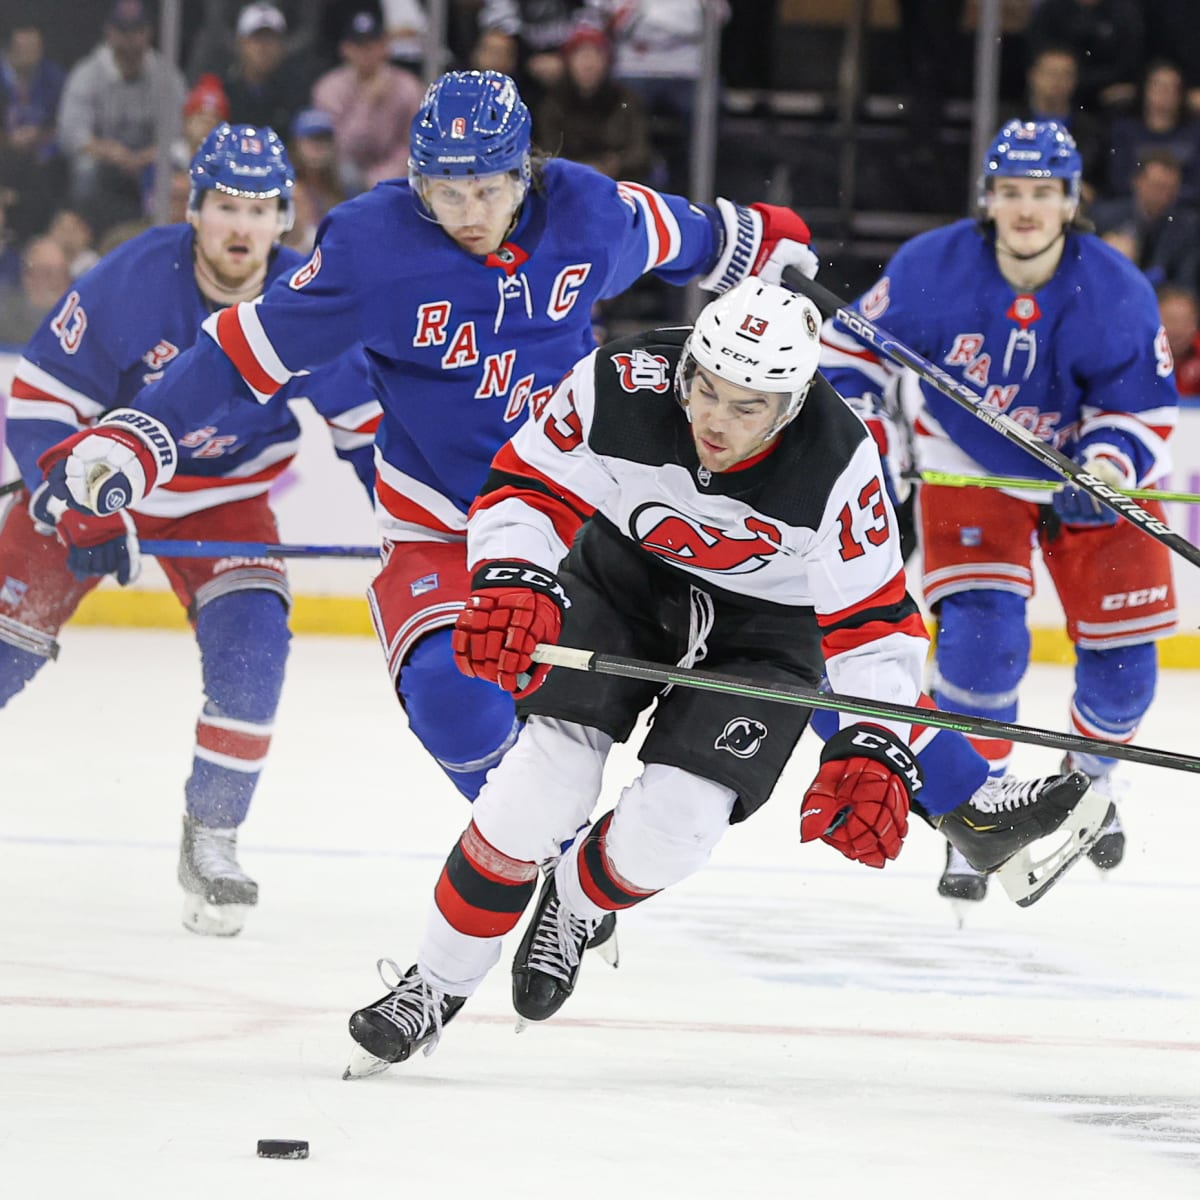 Devils beat Capitals in OT, will face Rangers in 1st round